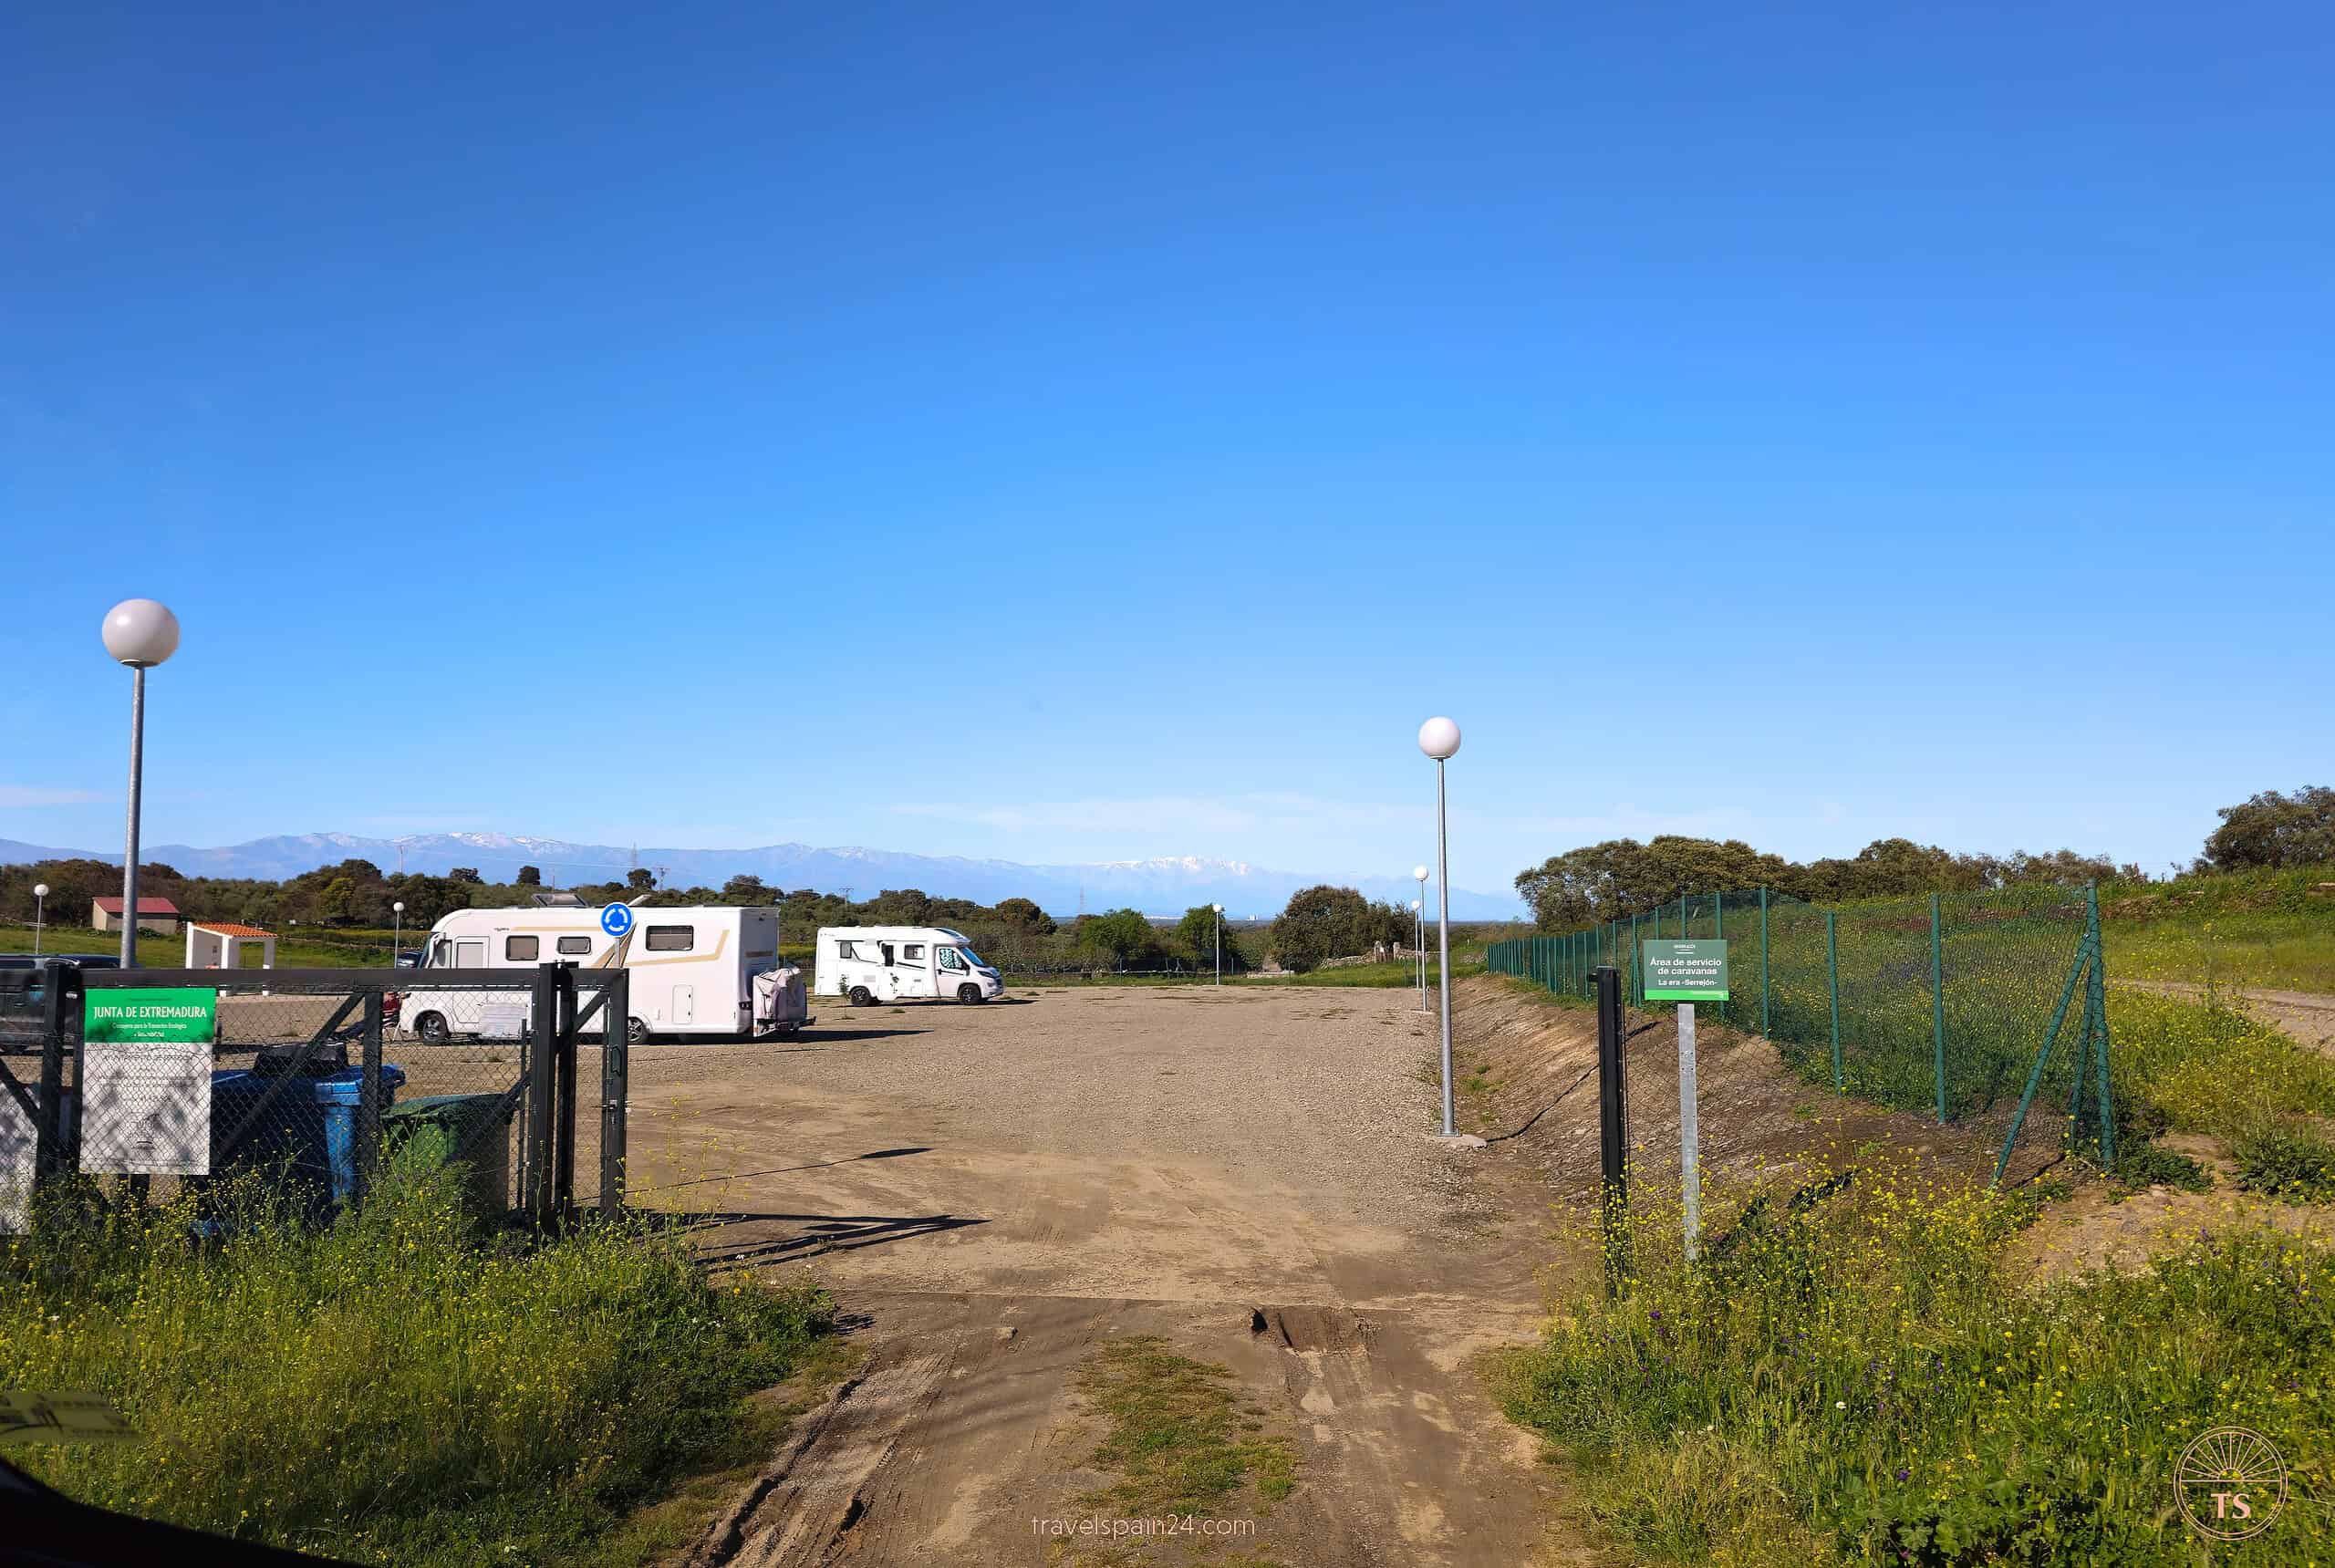 Our motorhome parking for the night in Serrejon, a peaceful spot about 35 minutes away from Monfragüe National Park, providing a base for our hiking adventures.